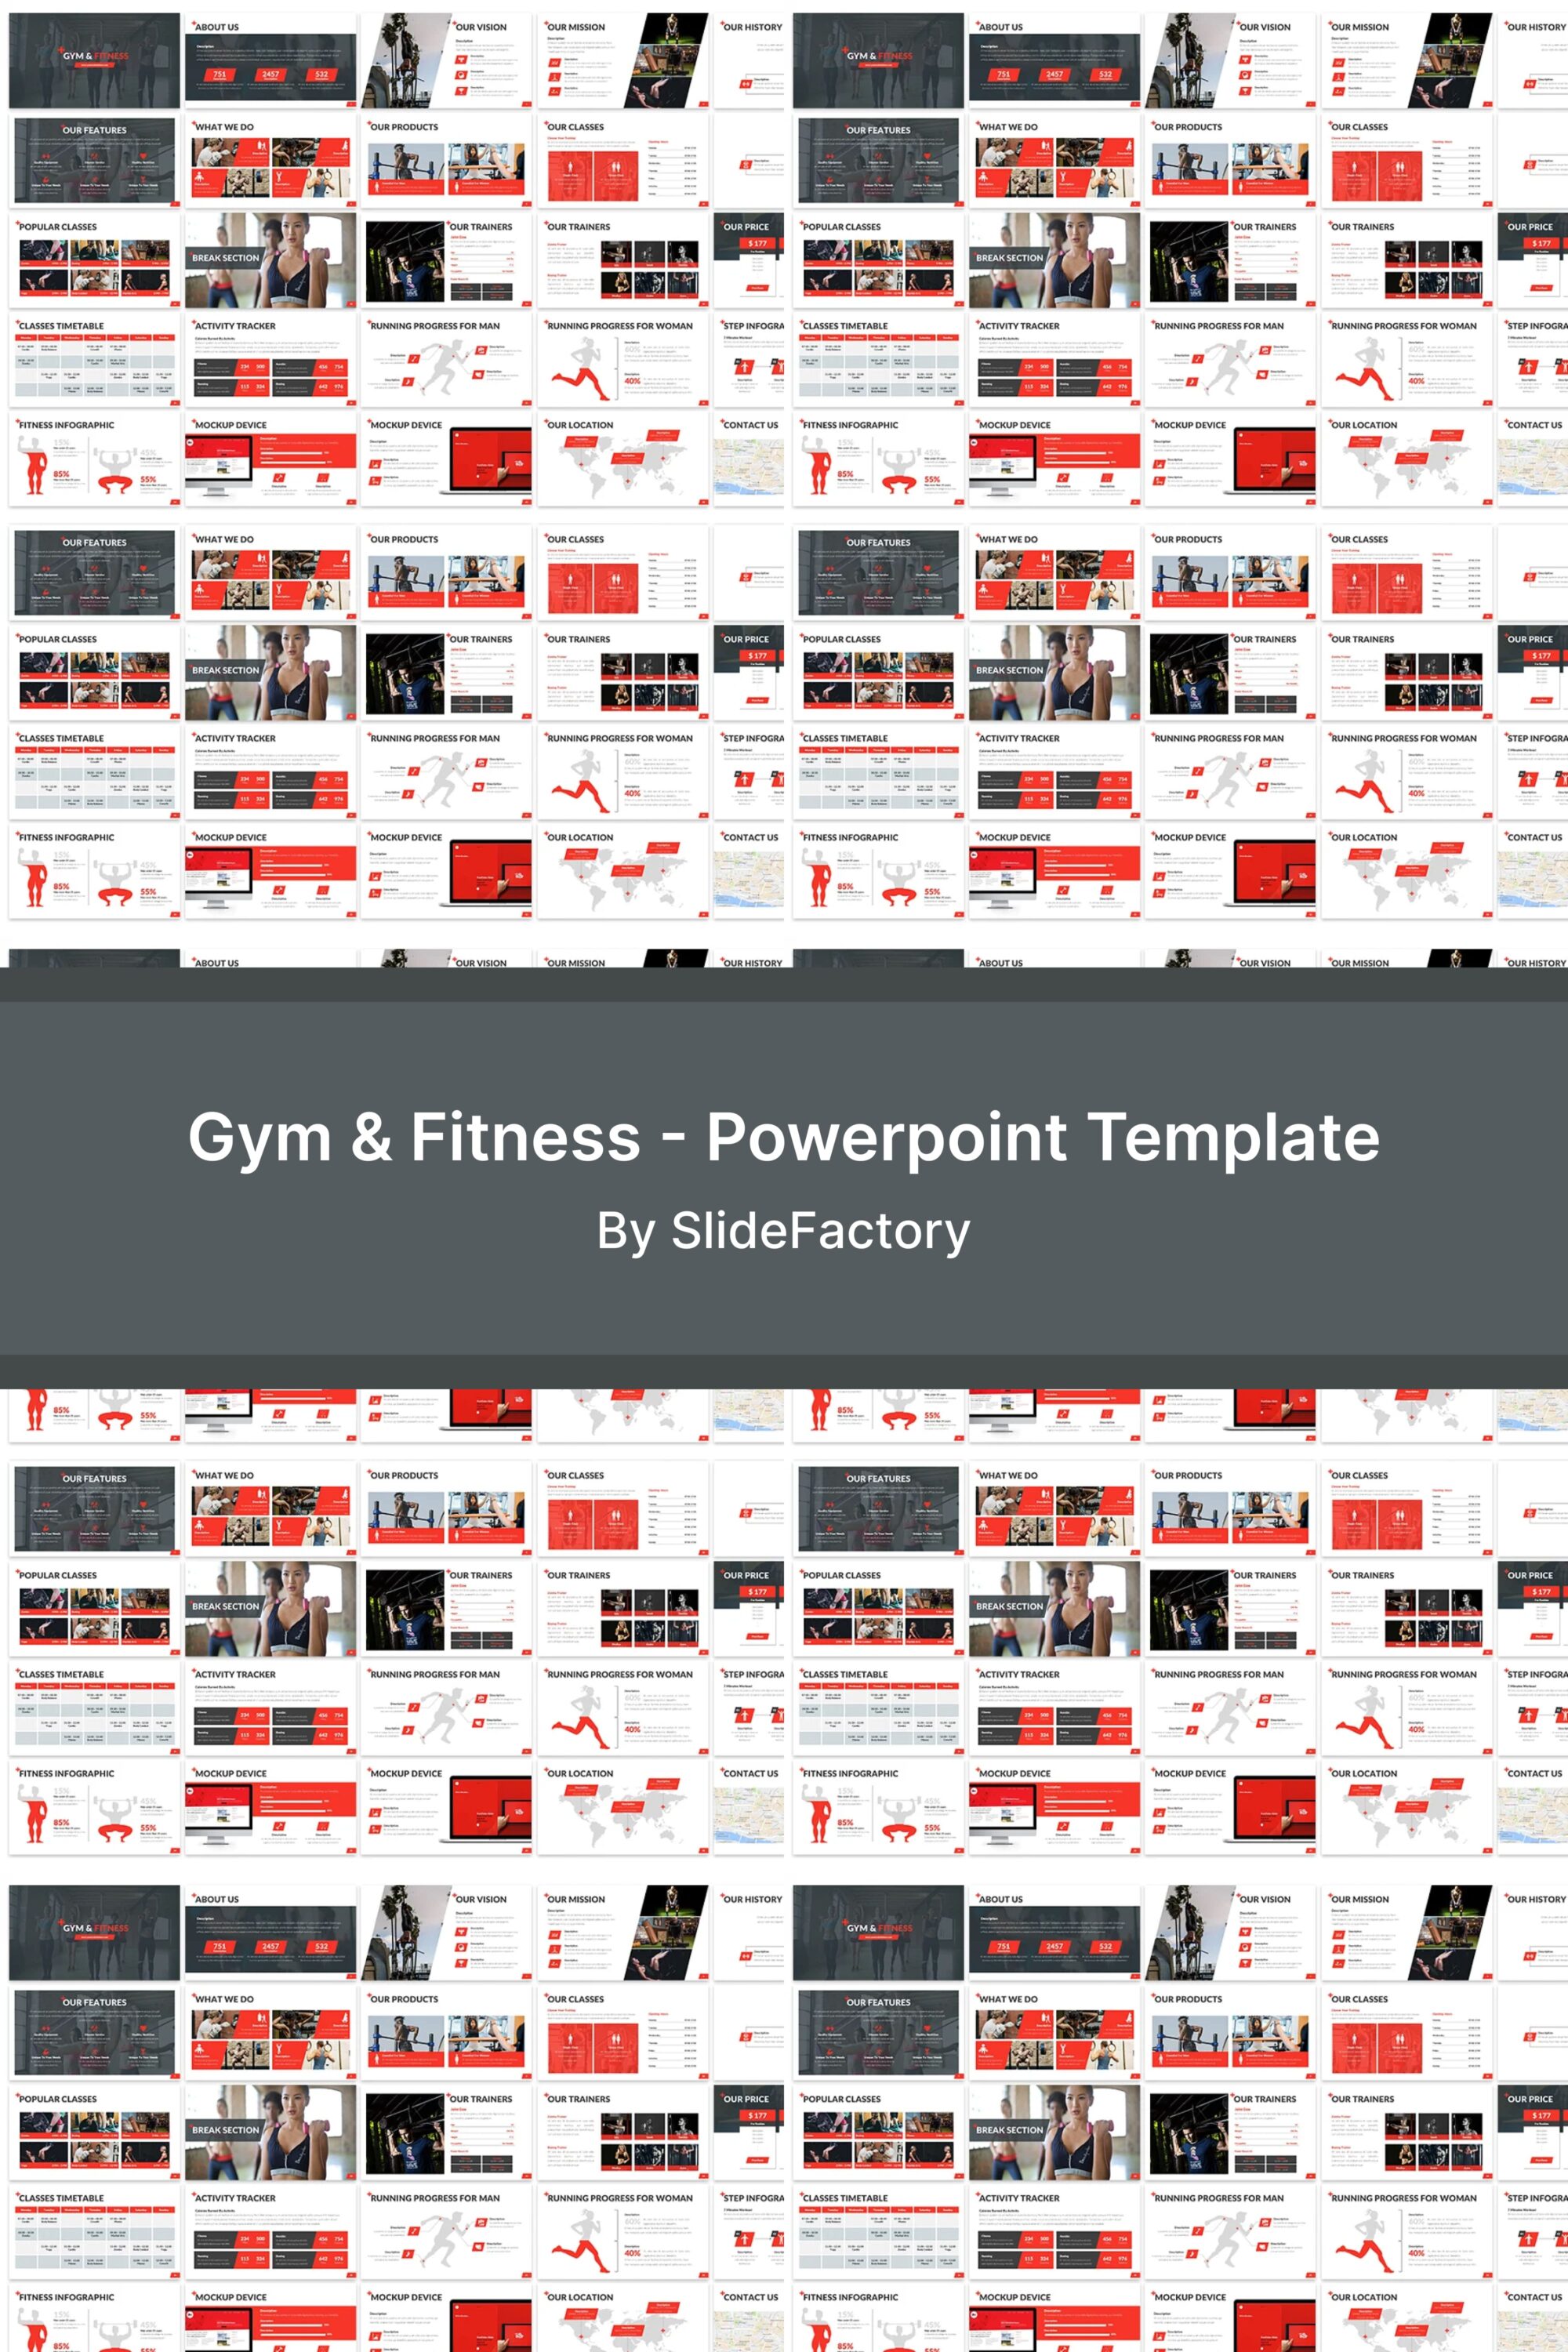 Gym Fitness Powerpoint Template Pinterest.